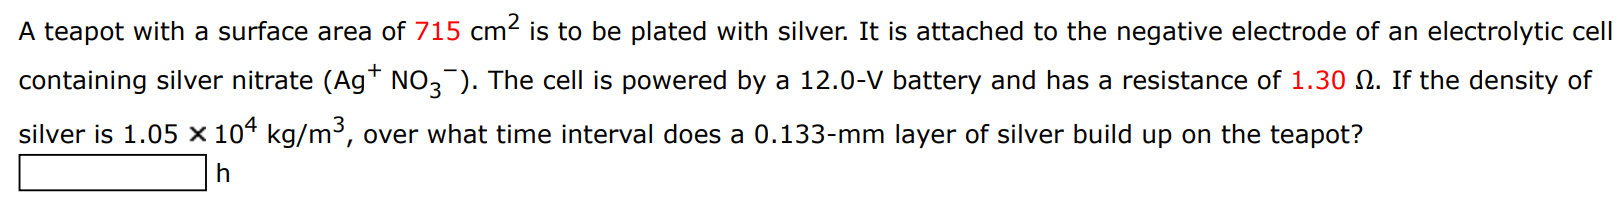 A teapot with a surface area of 715 cm2 is to be plated with silver. It is attached to the negative electrode of an electrolytic cell containing silver nitrate (Ag+NO3−). The cell is powered by a 12.0−V battery and has a resistance of 1.30 Ω. If the density of silver is 1.05×104 kg/m3, over what time interval does a 0.133−mm layer of silver build up on the teapot? h 